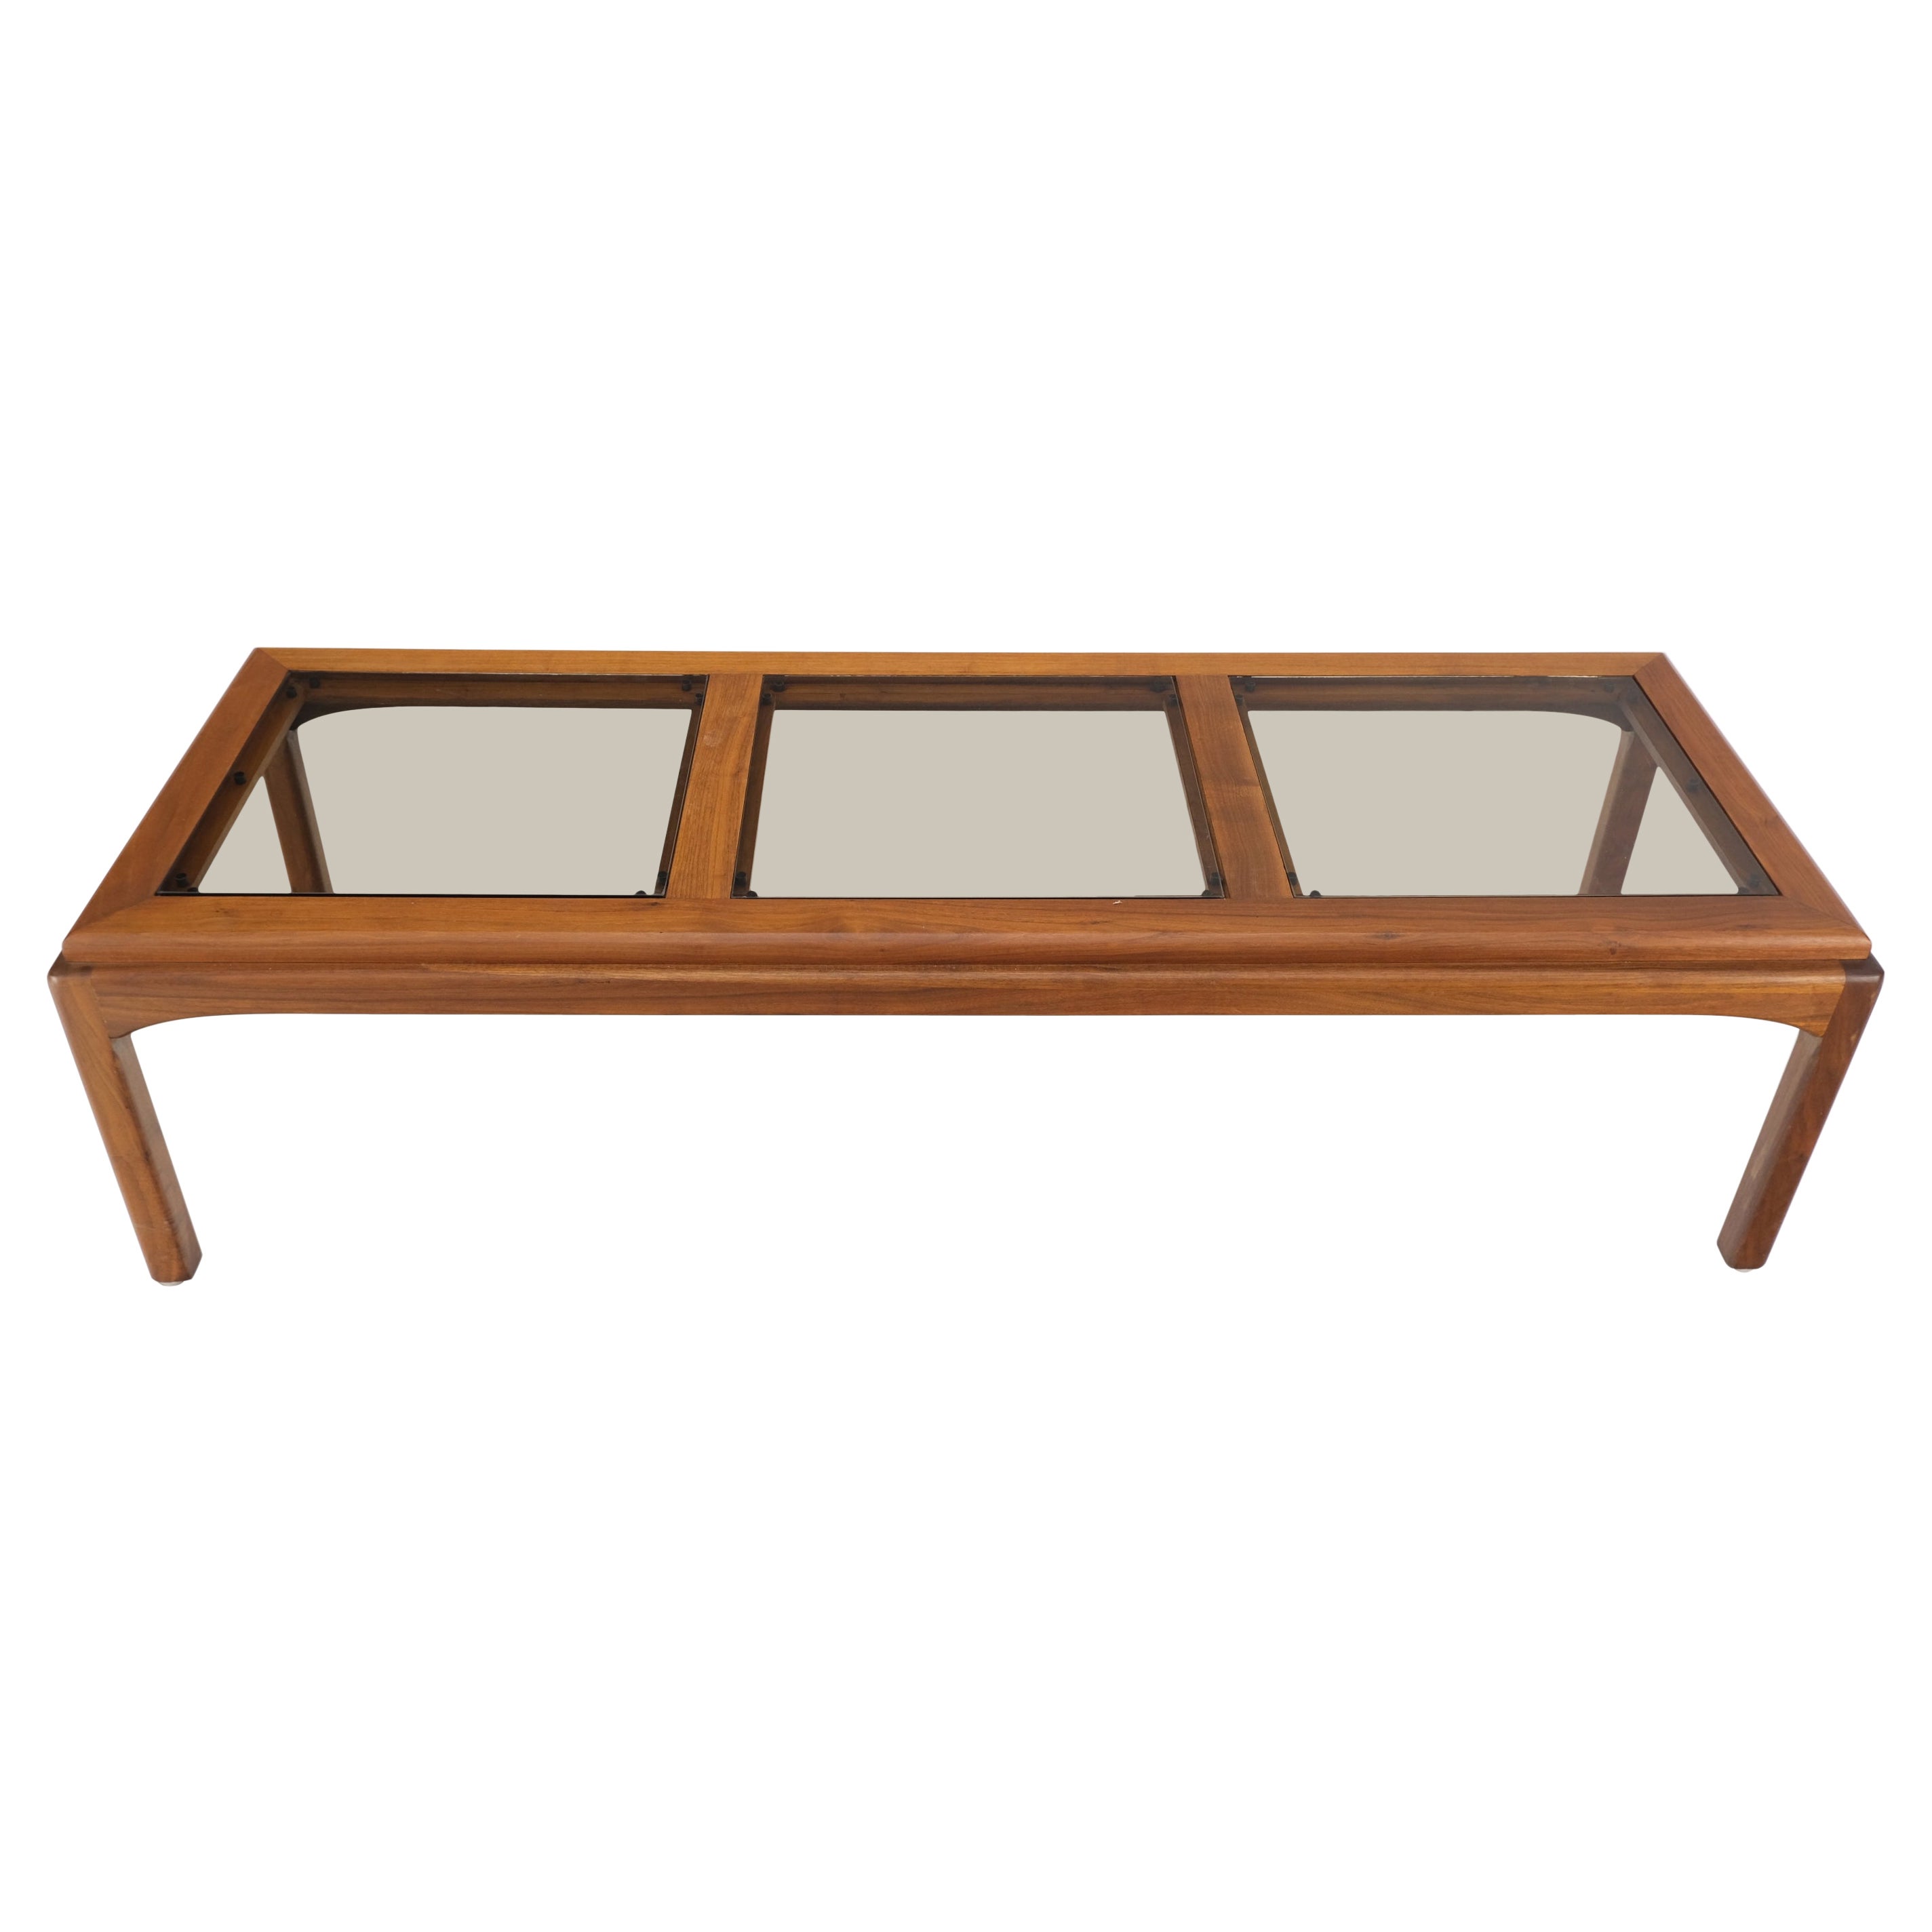 Large Rectangle 3 Smoked Glass Panes Top Solid Oiled Walnut Coffee Table MINT!